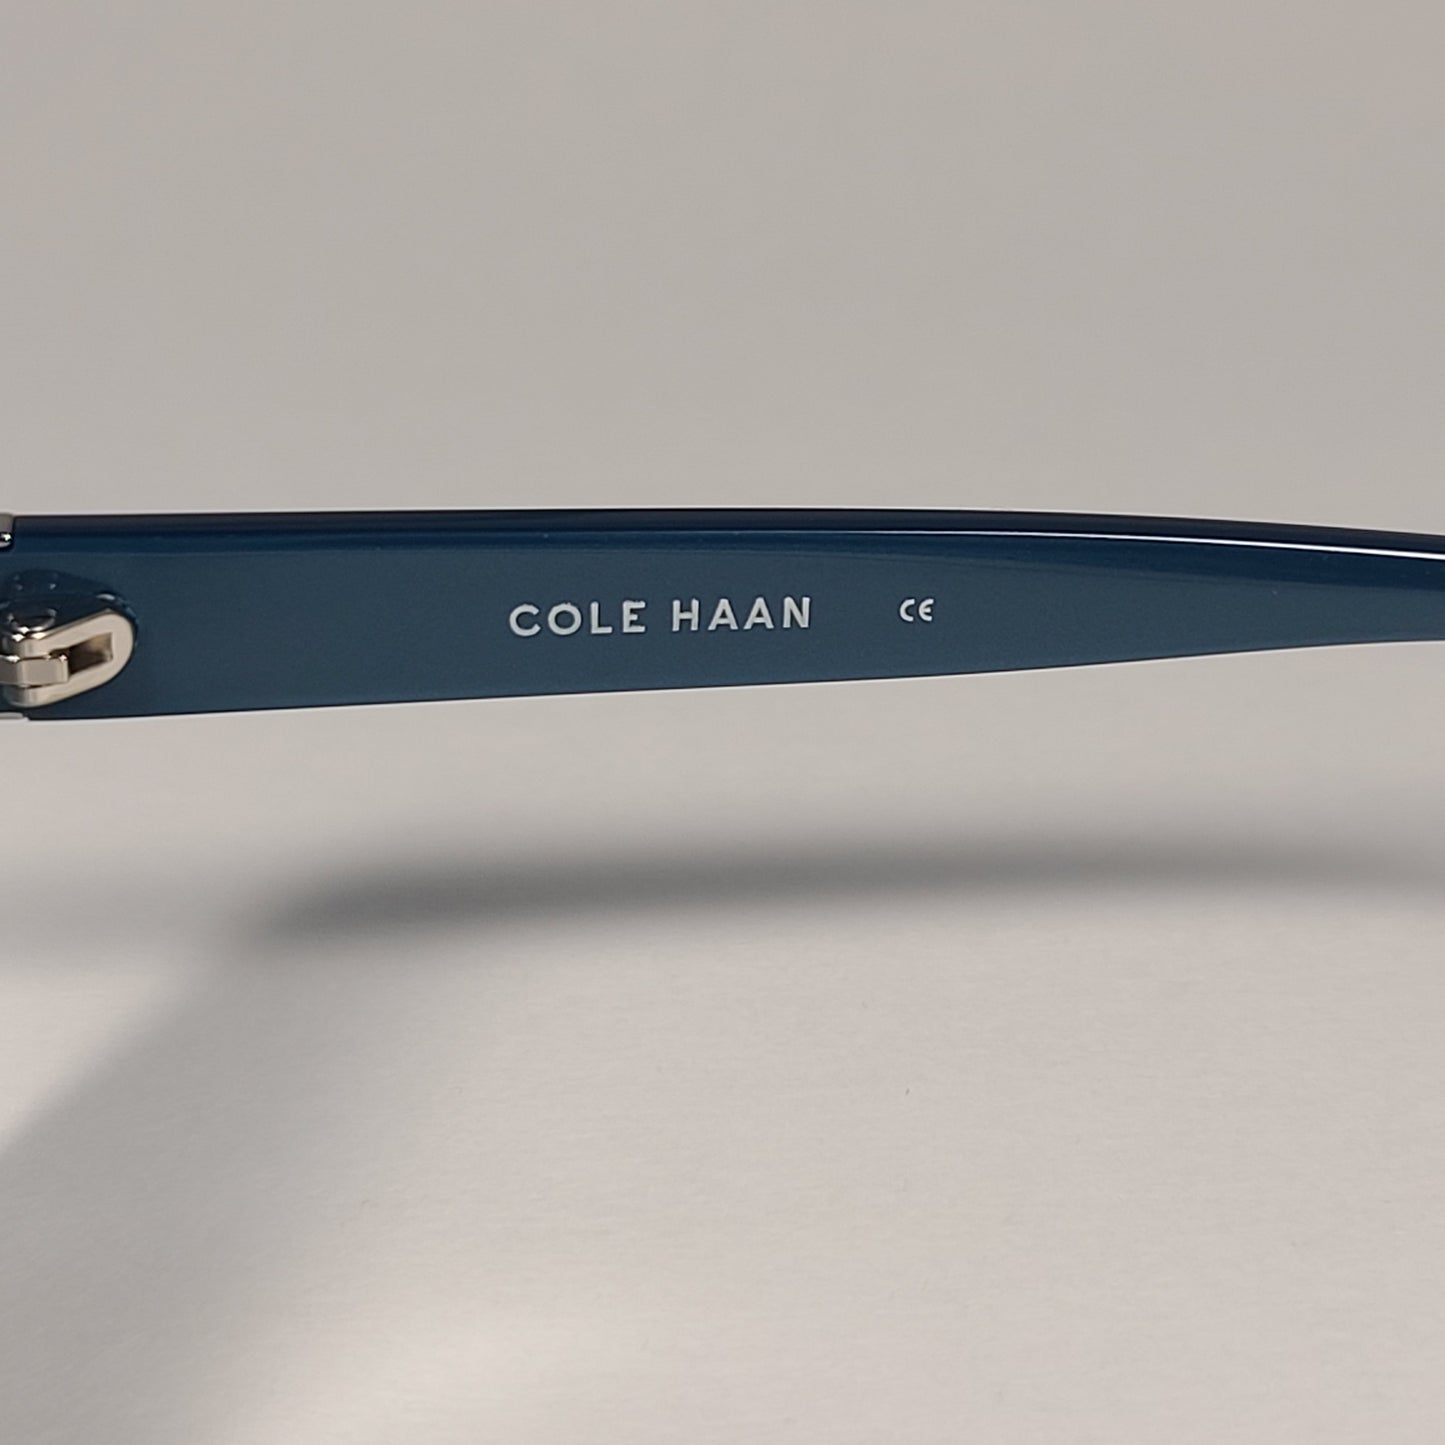 Cole Haan CH7007 320 Oval Sunglasses Crystal Teal Frame Gray Gradient Lens - Sunglasses